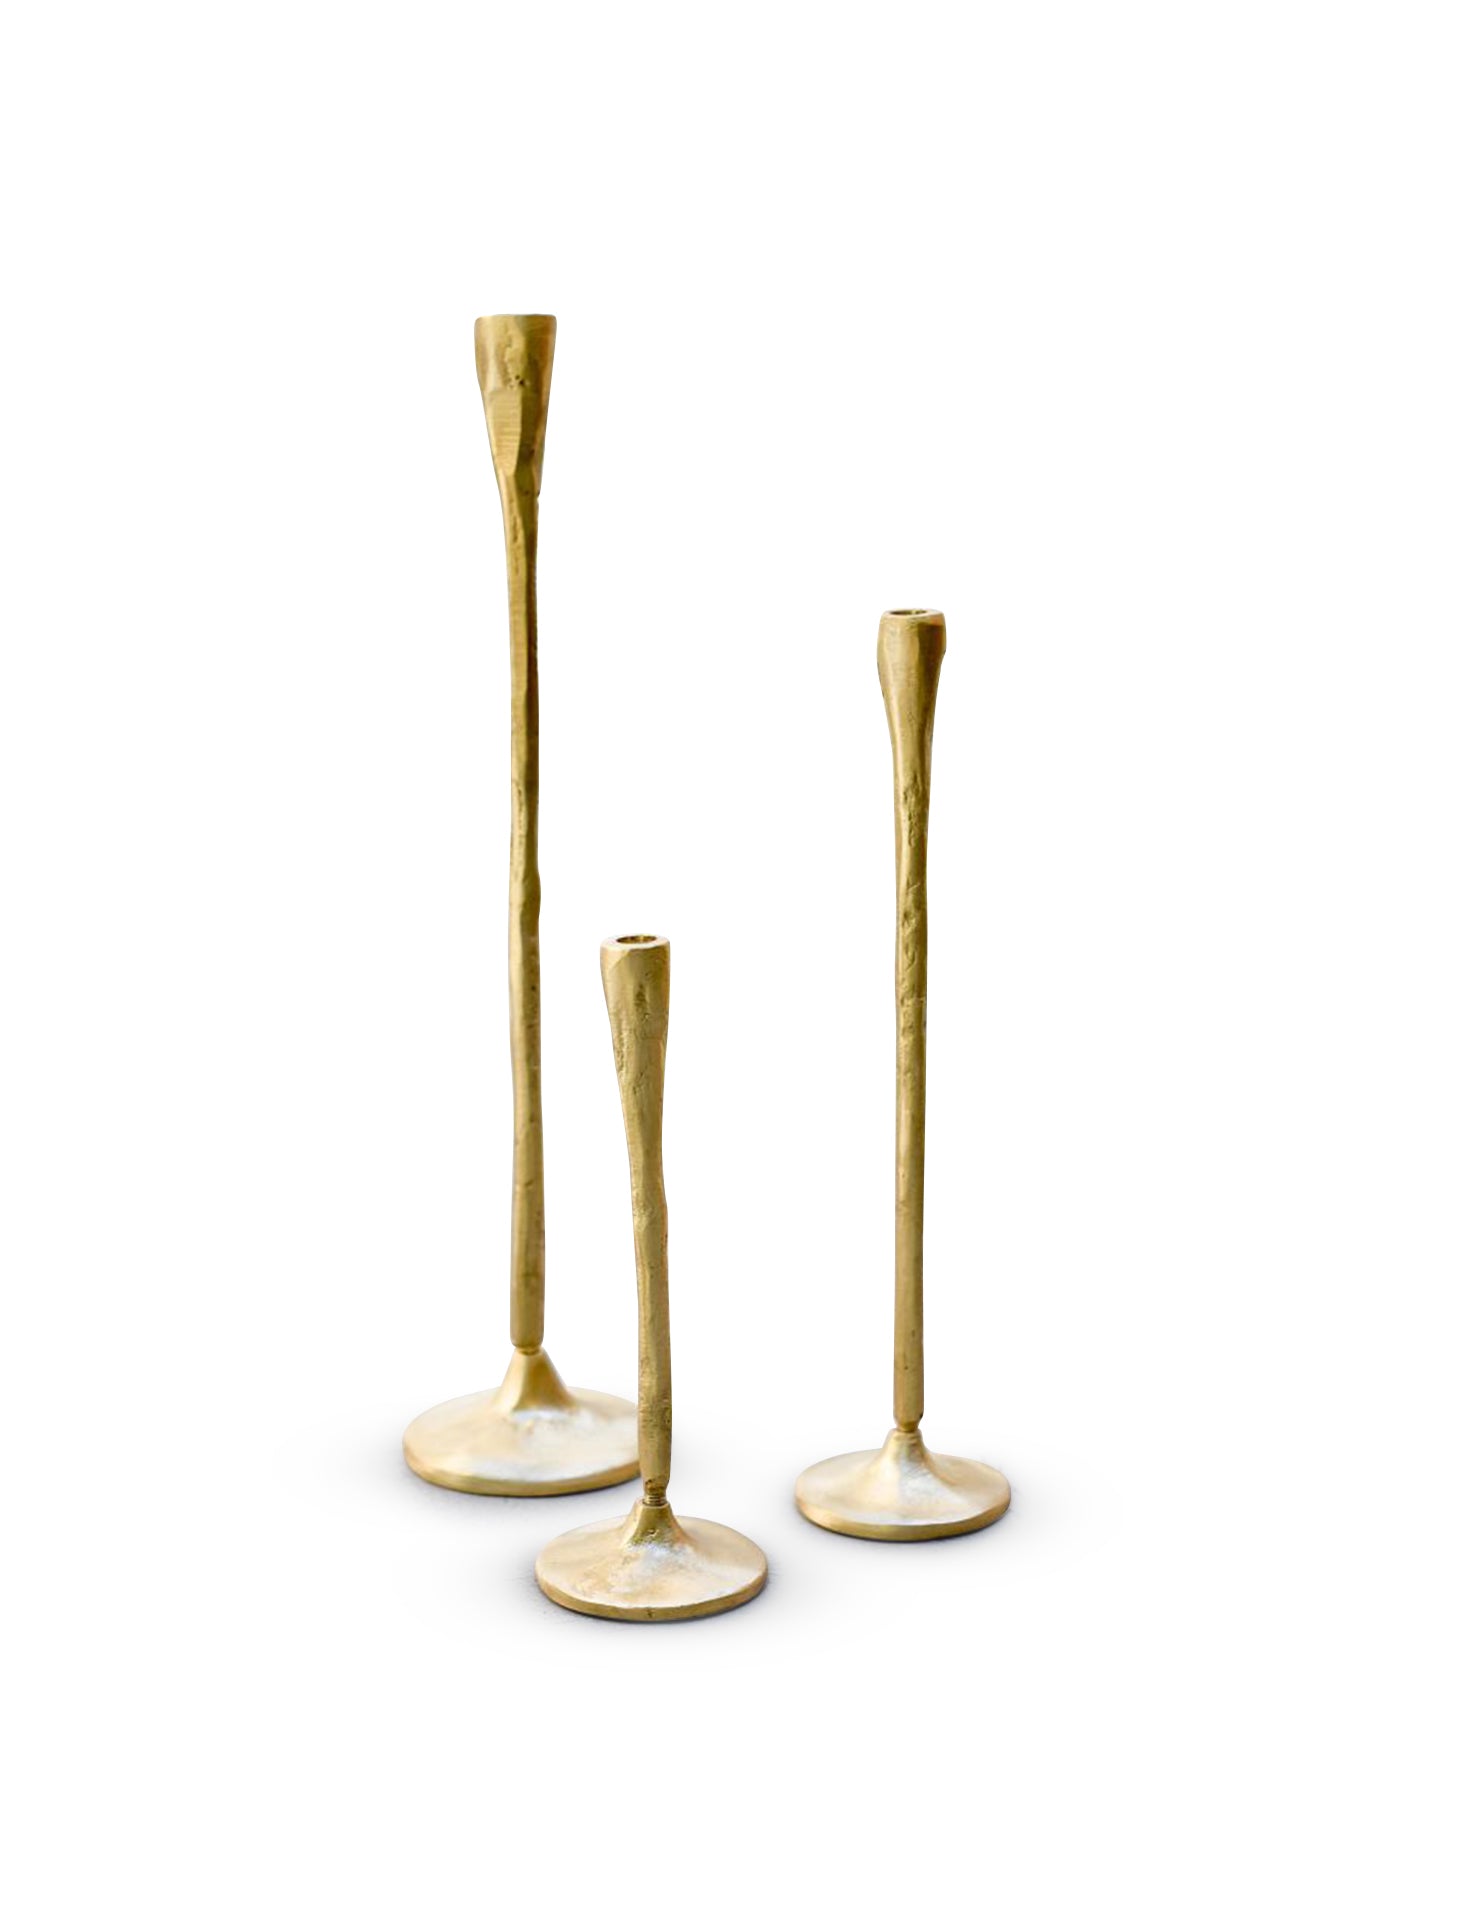 Three Graces Candlestick Holders